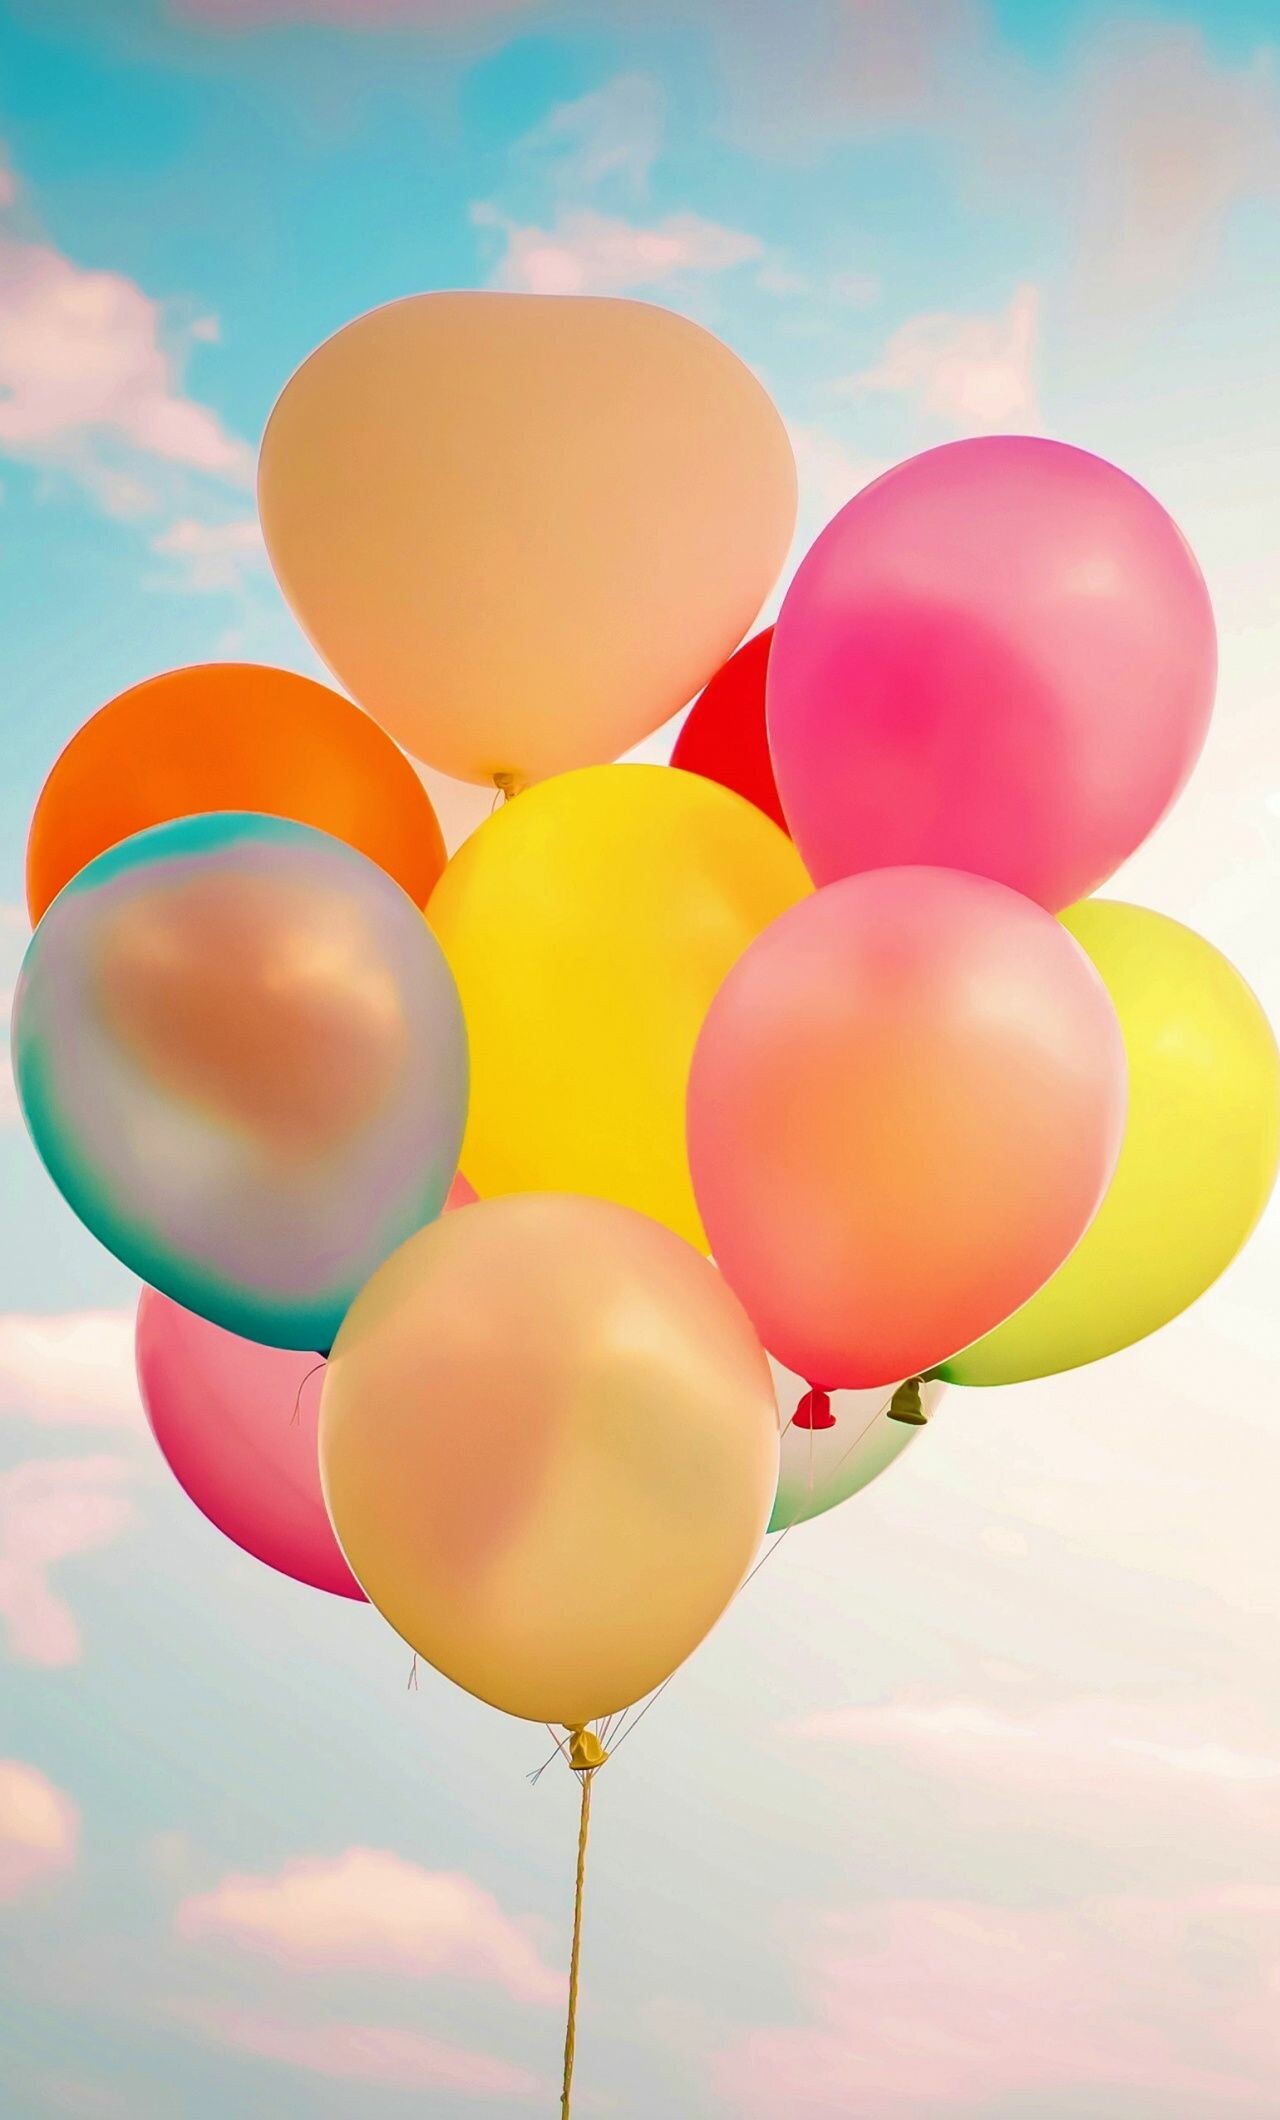 Balloons: Birthday, A child’s toy or party decoration, Multicolored. 1280x2120 HD Wallpaper.